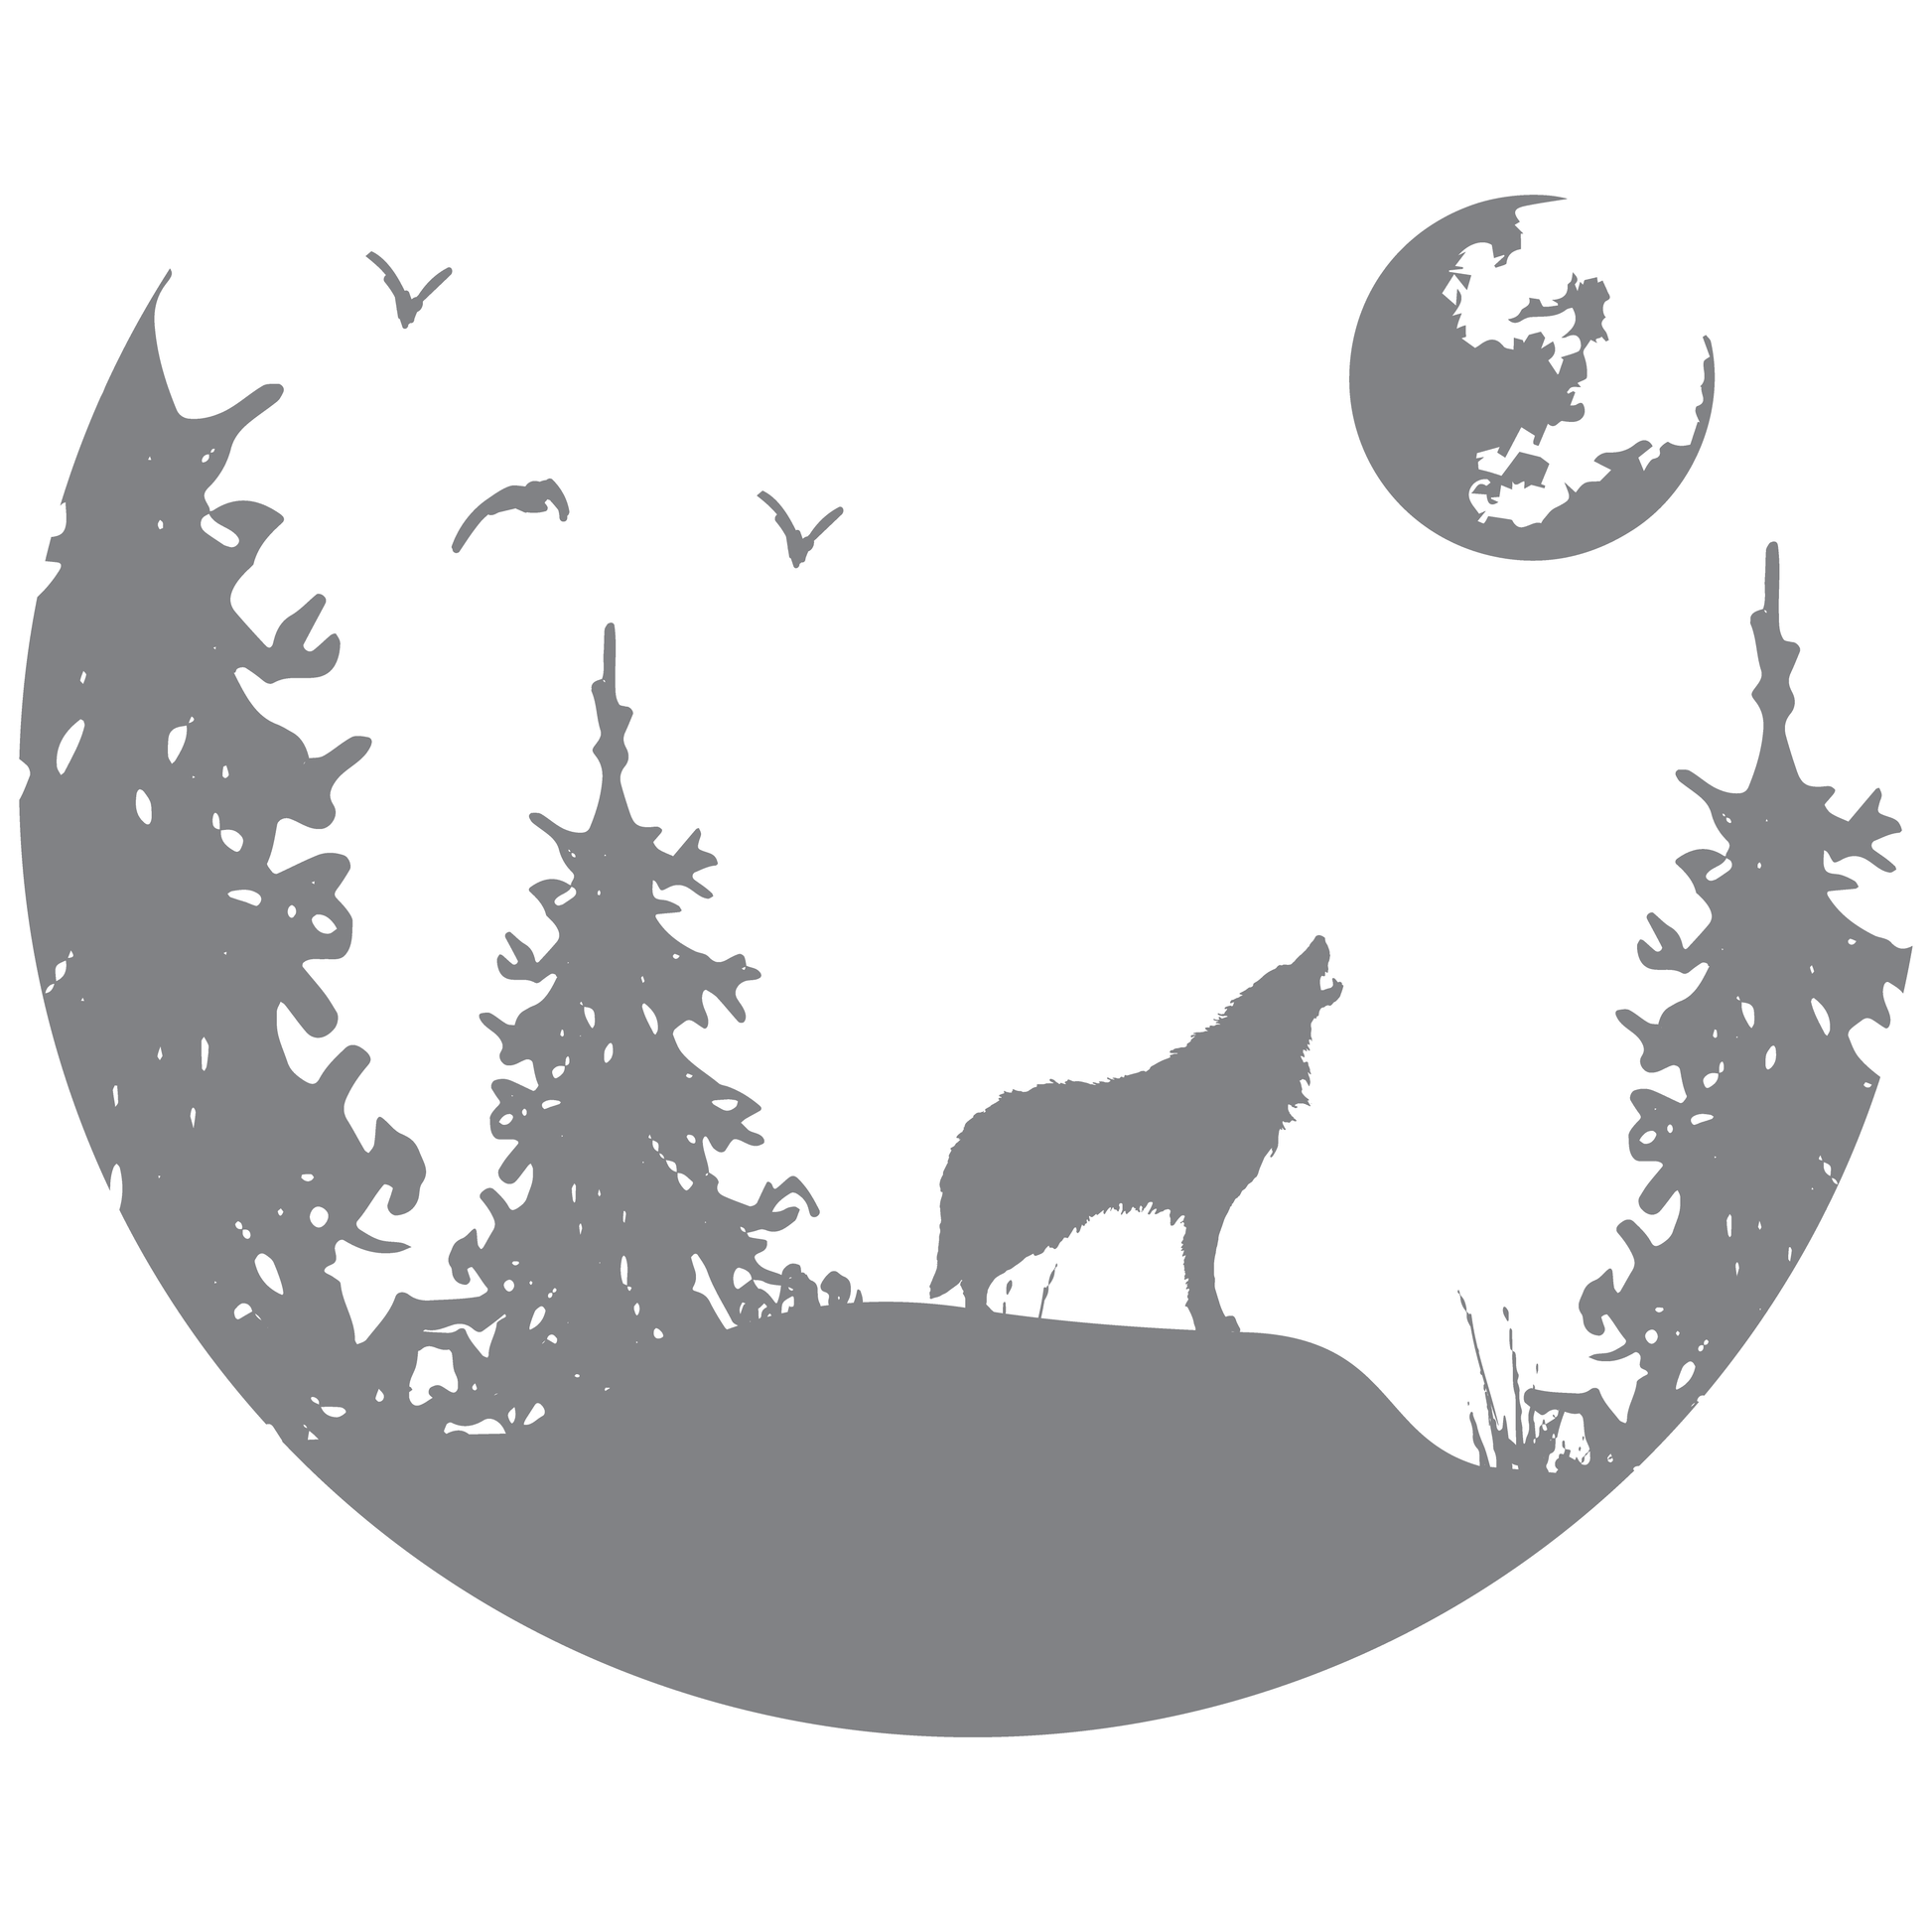 ShopVinylDesignStore.com Wolf Howling at The Moon In A Half Moon with Forest Scenery Wide Shop Vinyl Design decals stickers